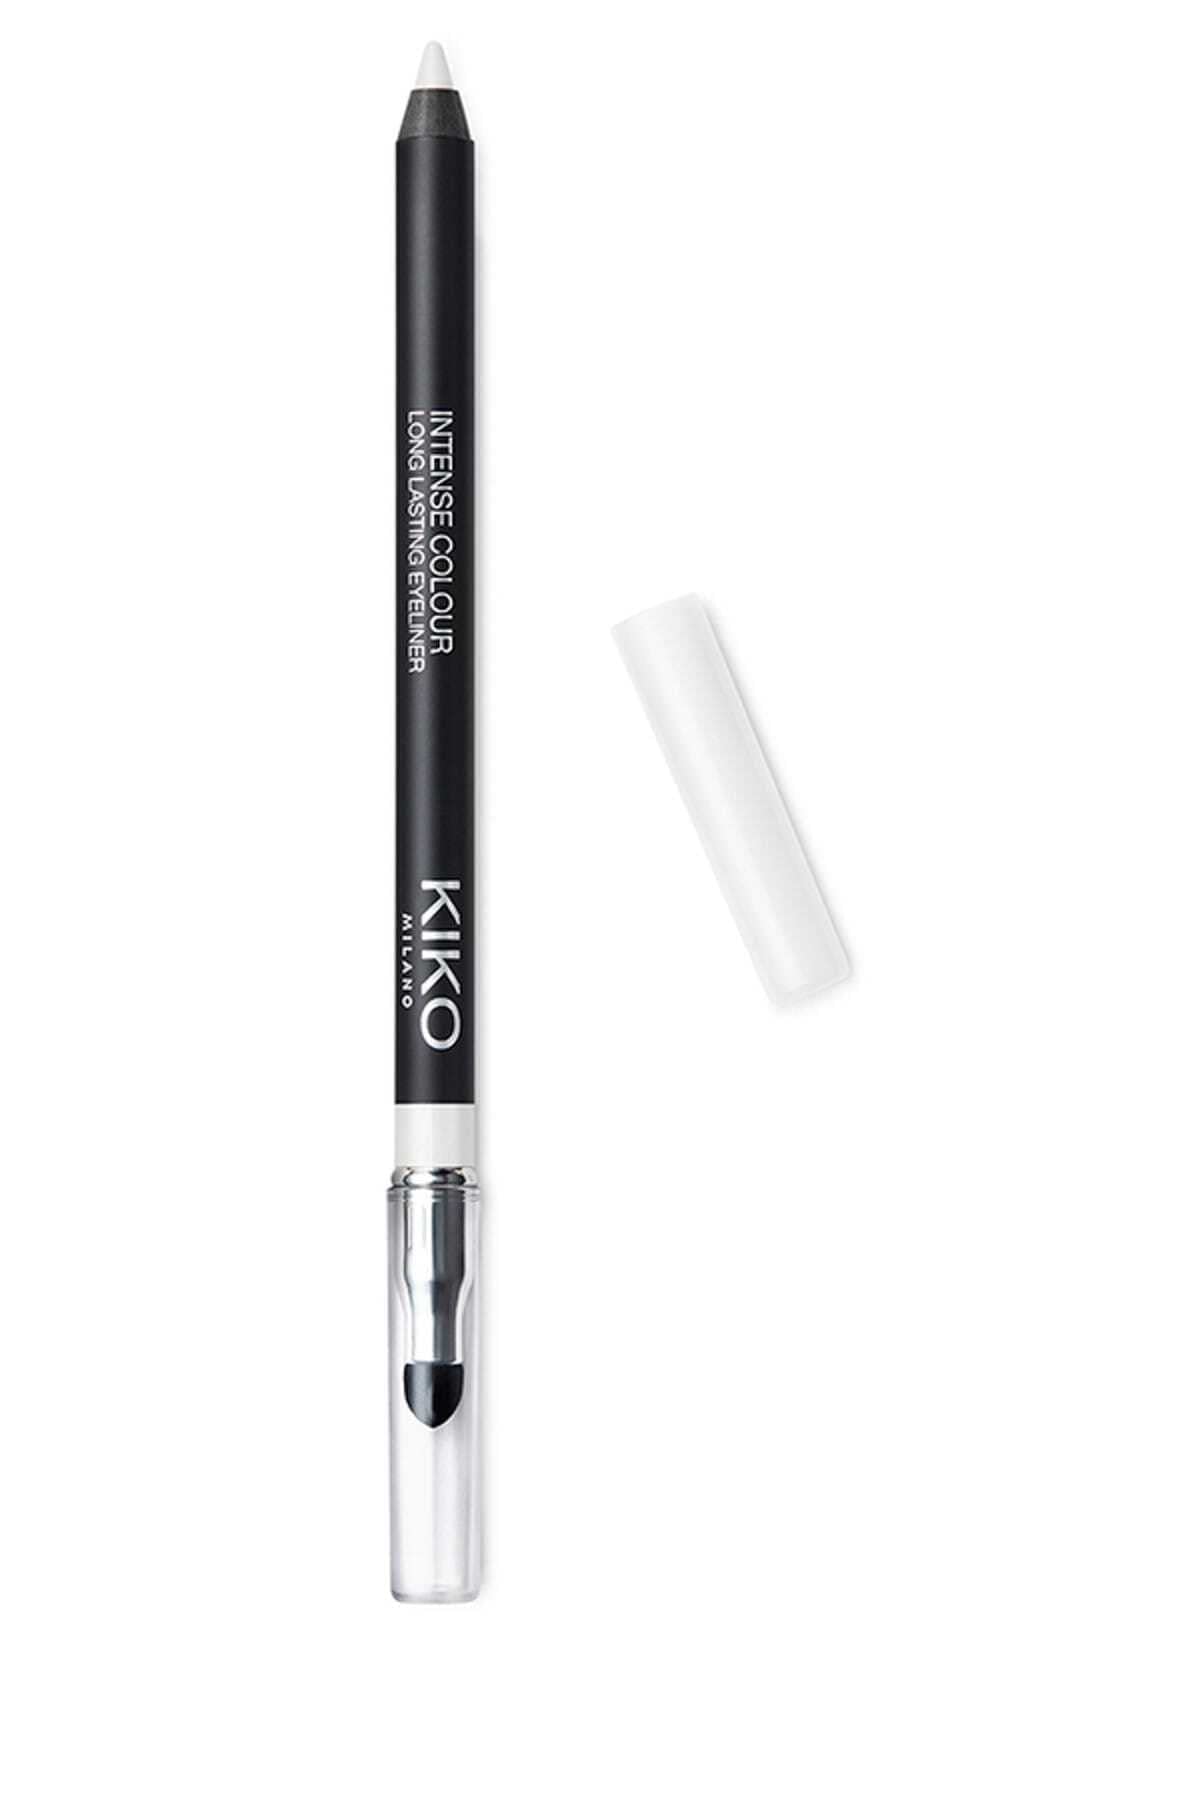 Kiko Milano Intense colour Long Lasting Eyeliner 01  Intense And Smooth-gliding Outer Eye Pencil With Long Wear